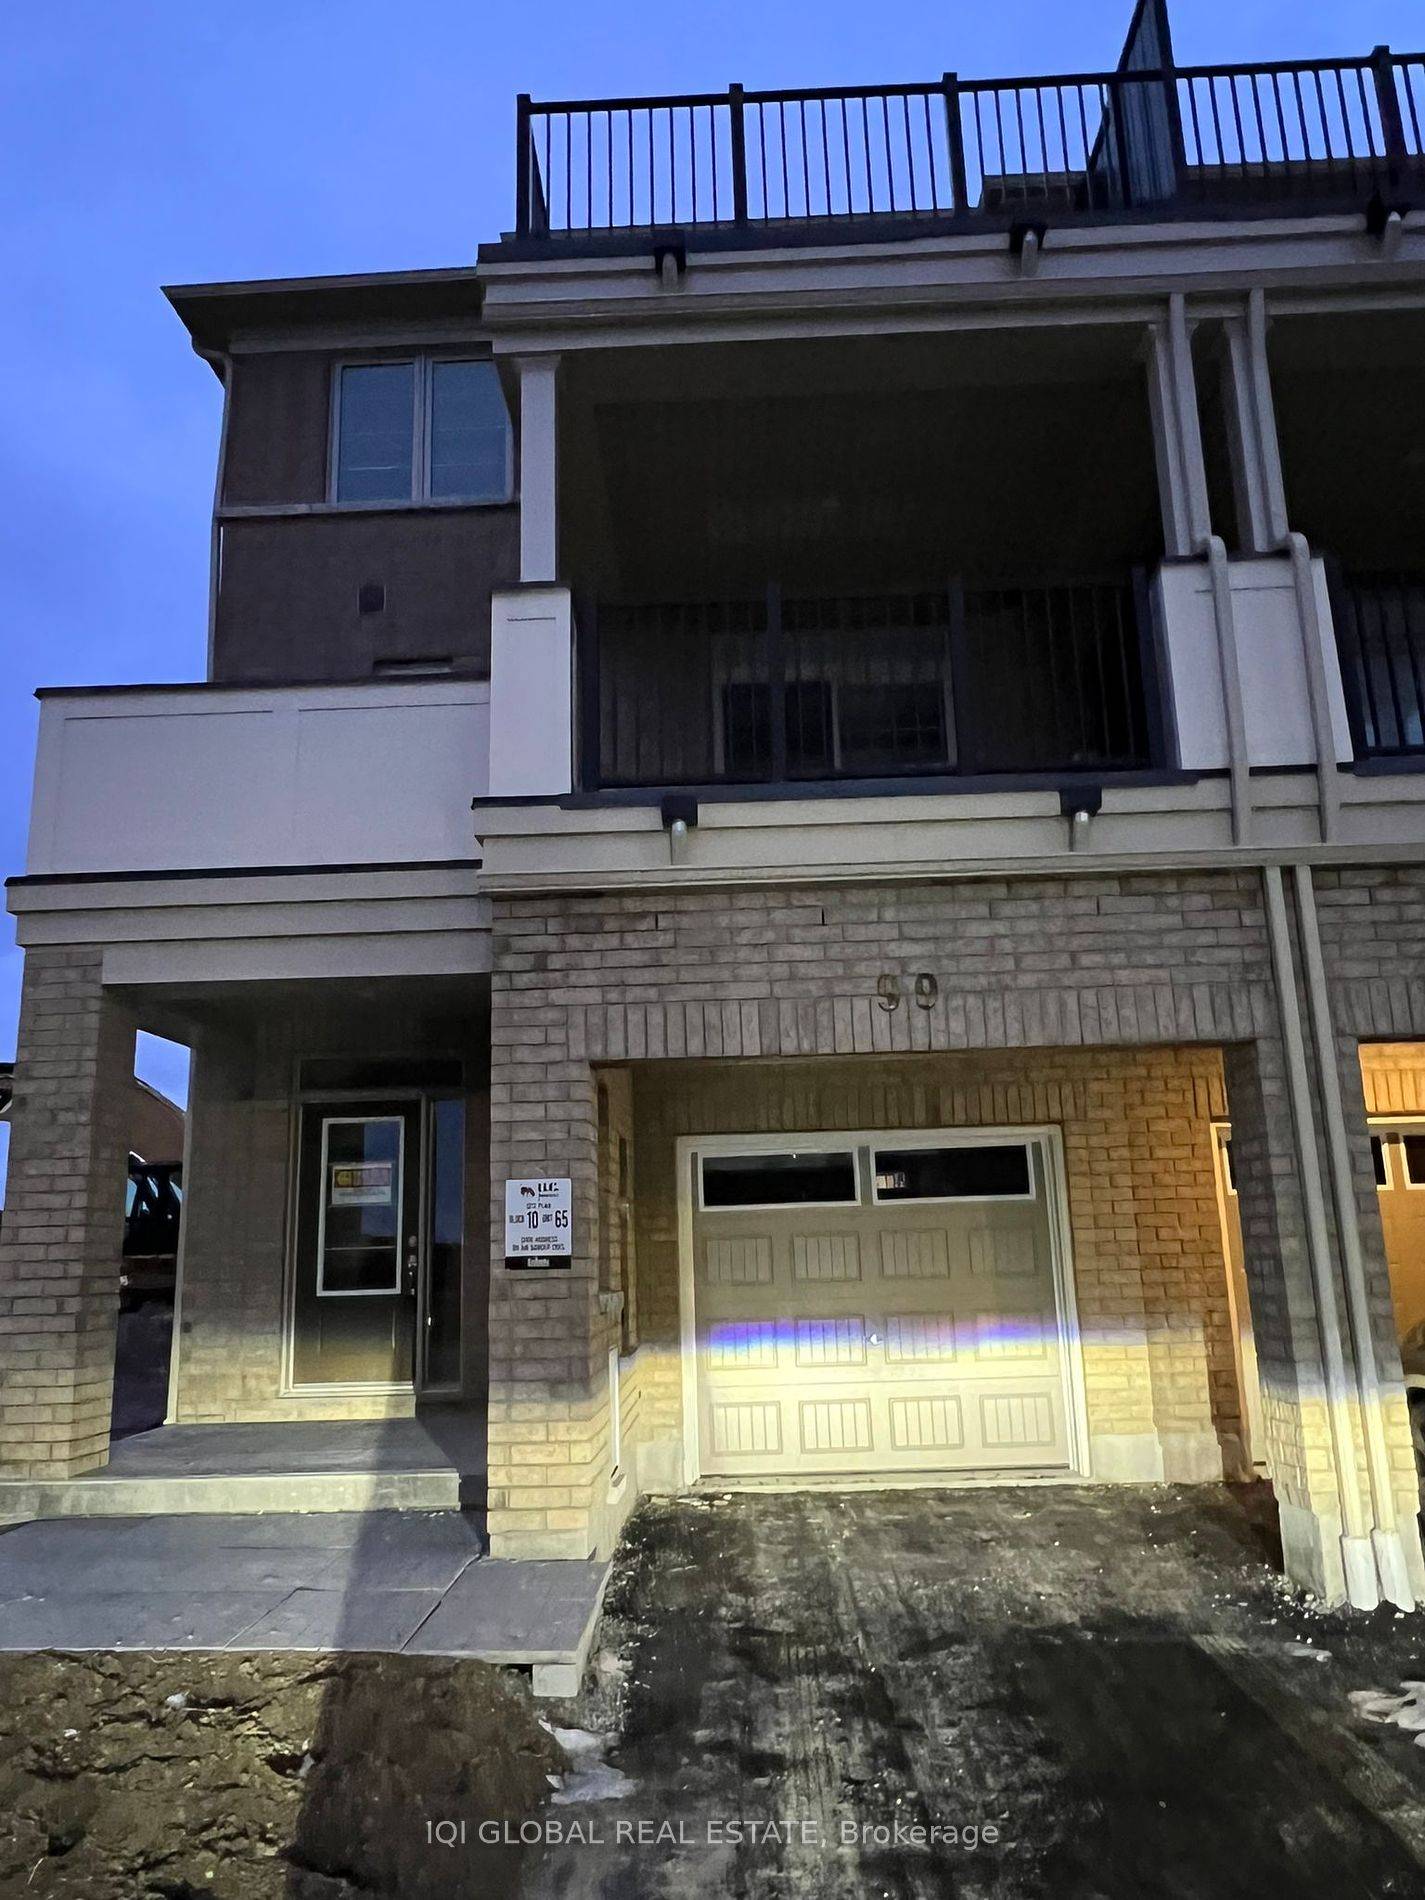 This executive townhouse is a brand new, never lived in freehold 3 storey corner unit spanning 1819 sq ft.